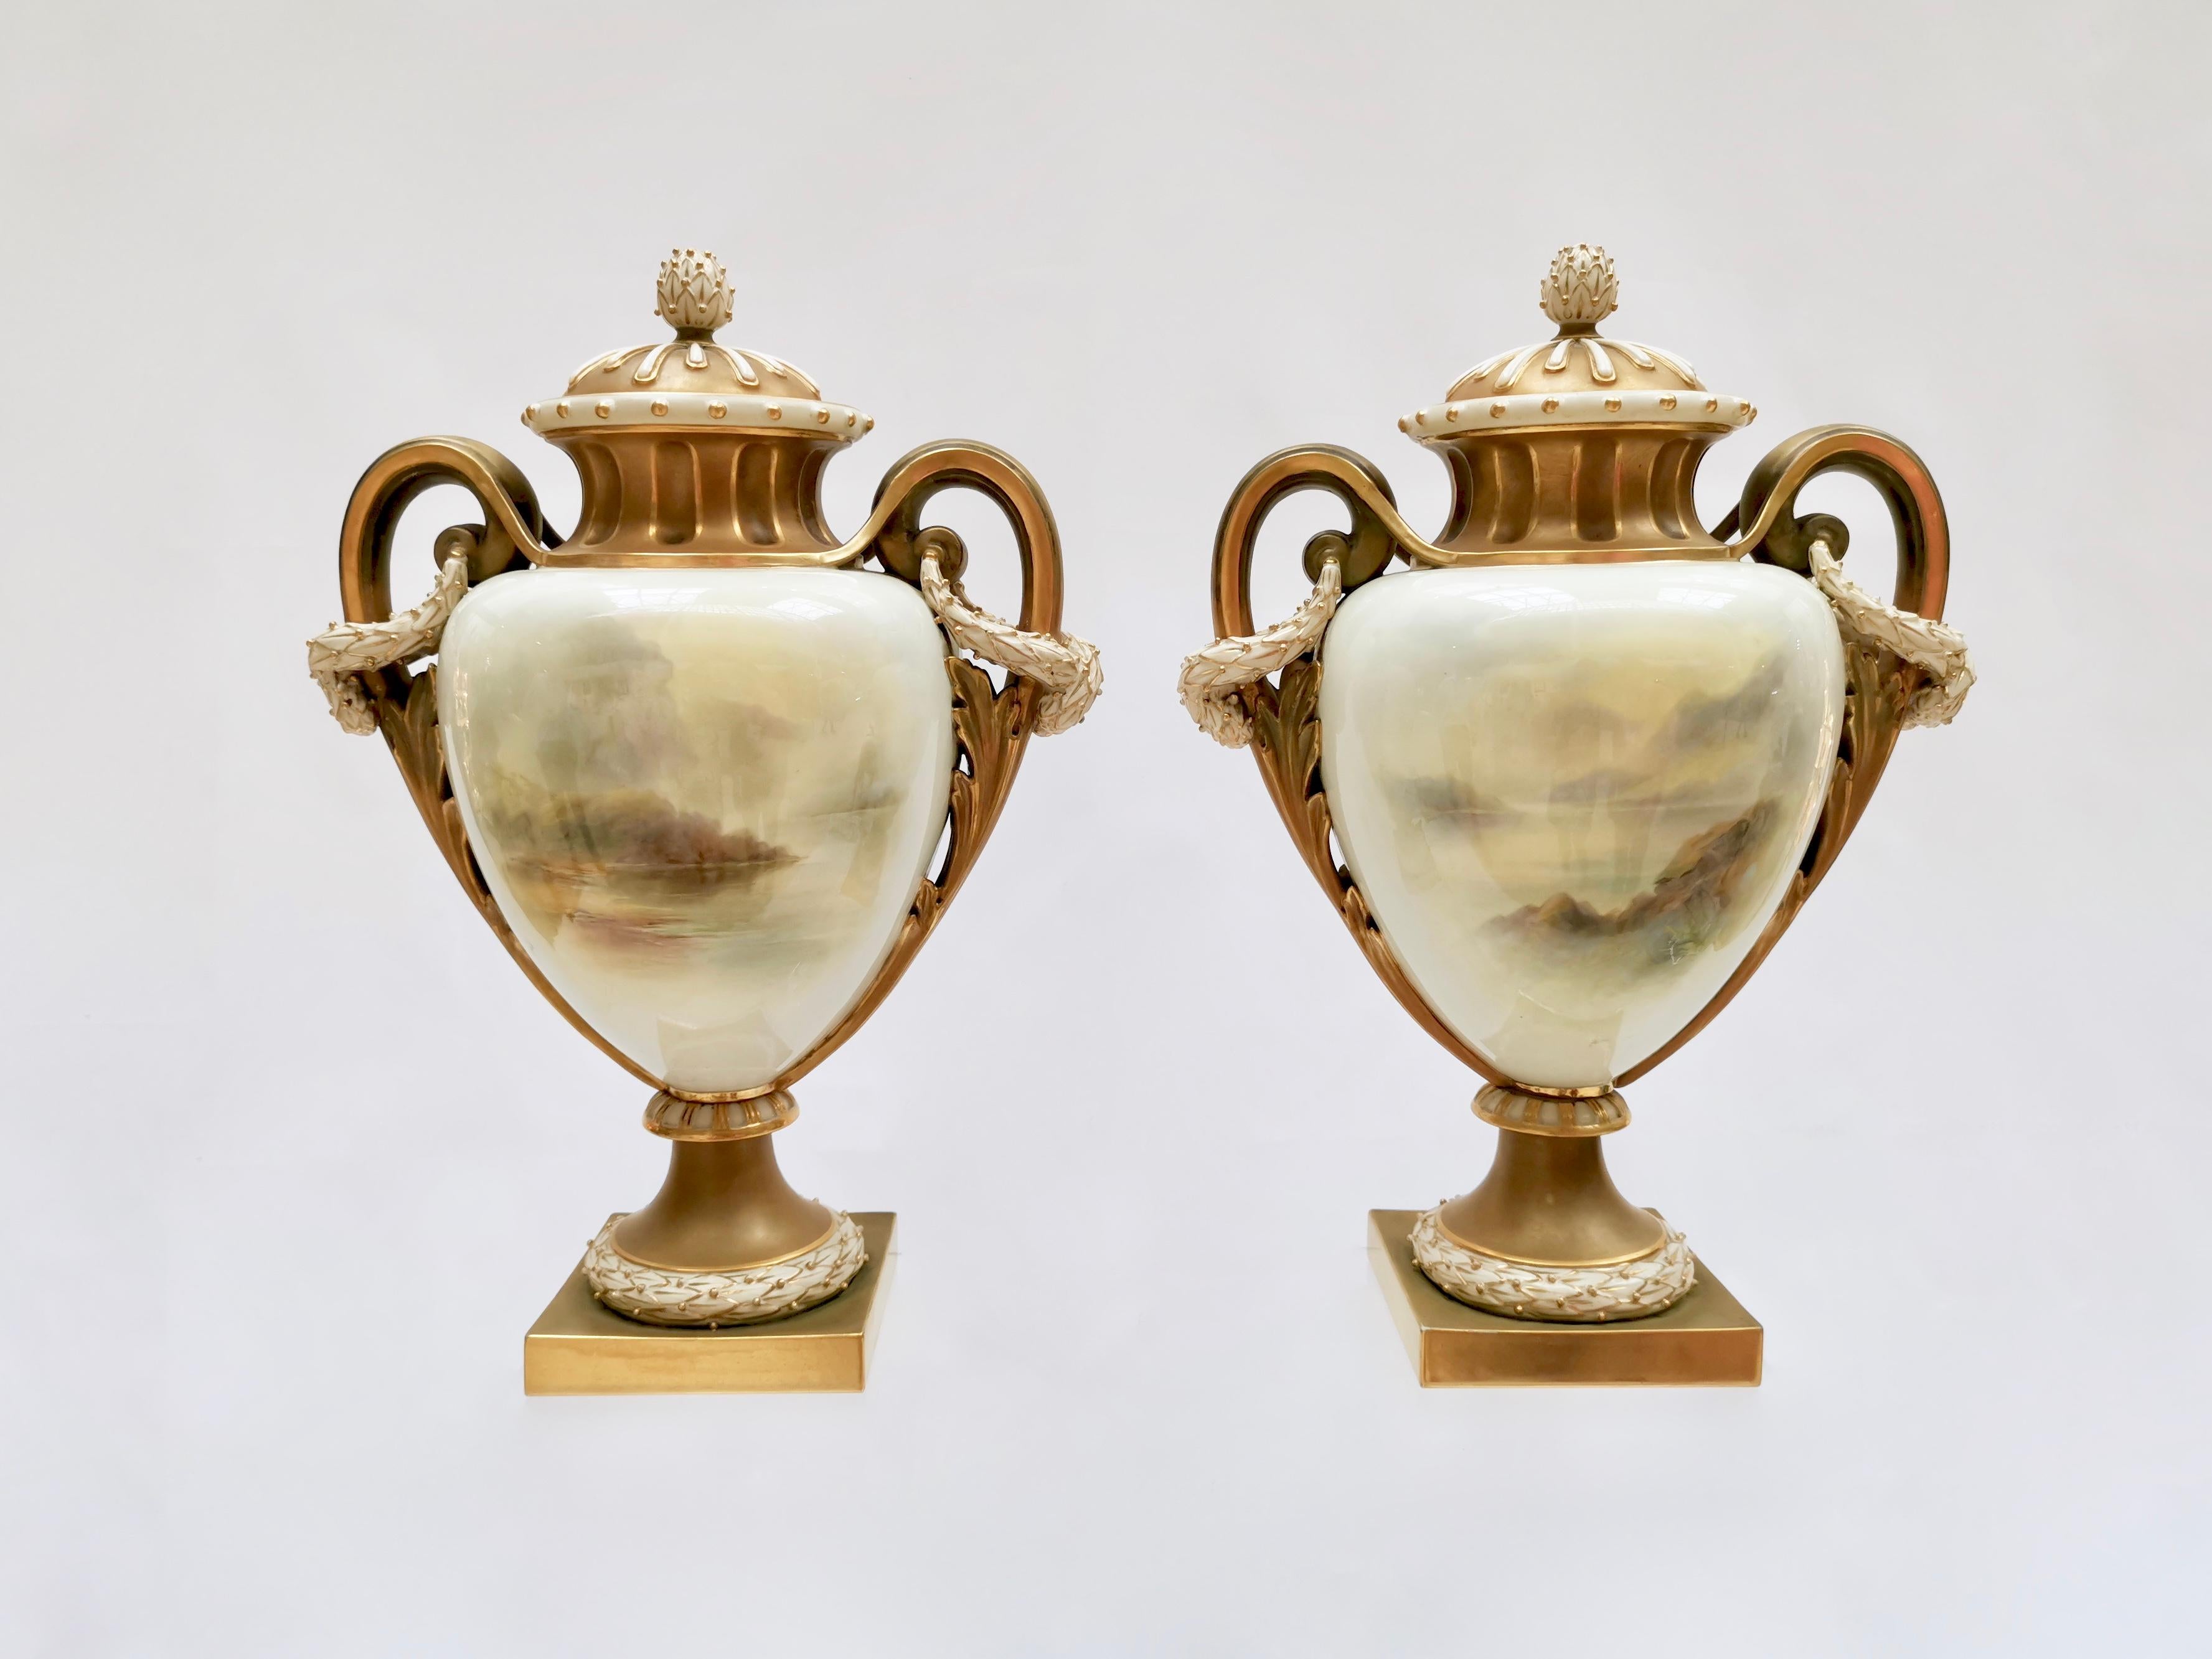 This is an important and extremely rare pair of porcelain vases and covers made by Royal Worcester in 1903. The vases are painted and signed by the famous porcelain artist John Stinton.

The original Worcester pottery was founded in the mid-18th